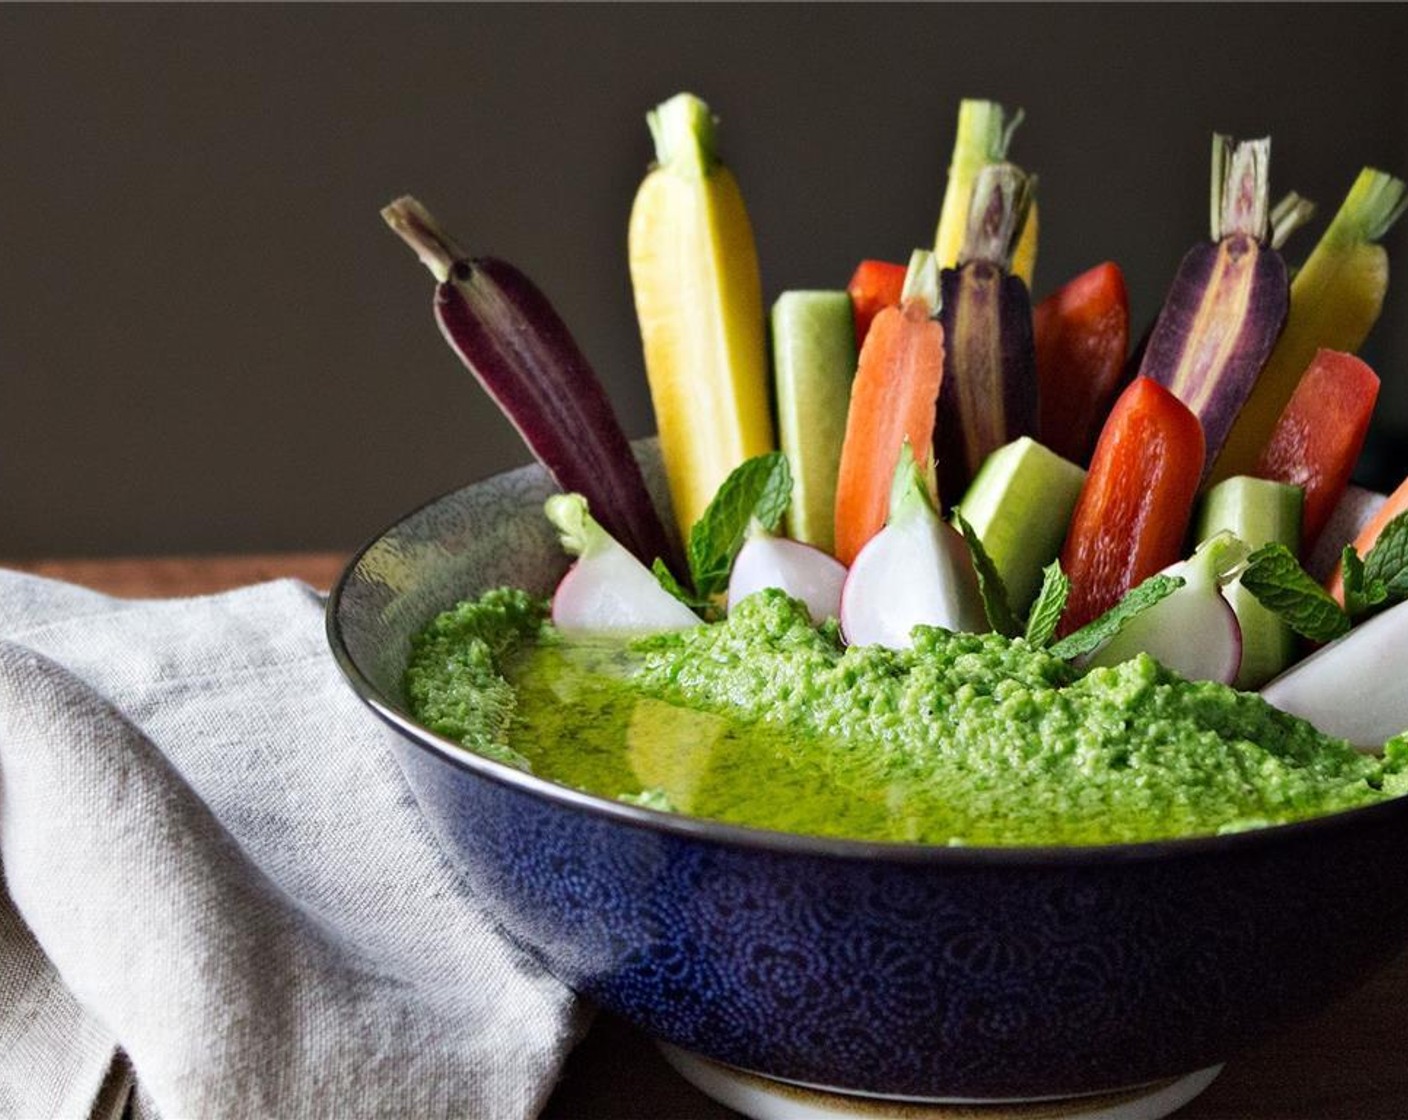 step 4 Scoop hummus into a medium size bowl and arrange your choice of crudites within or serve on the side. Add a small pool of Extra-Virgin Olive Oil (1 Tbsp), serve and enjoy!